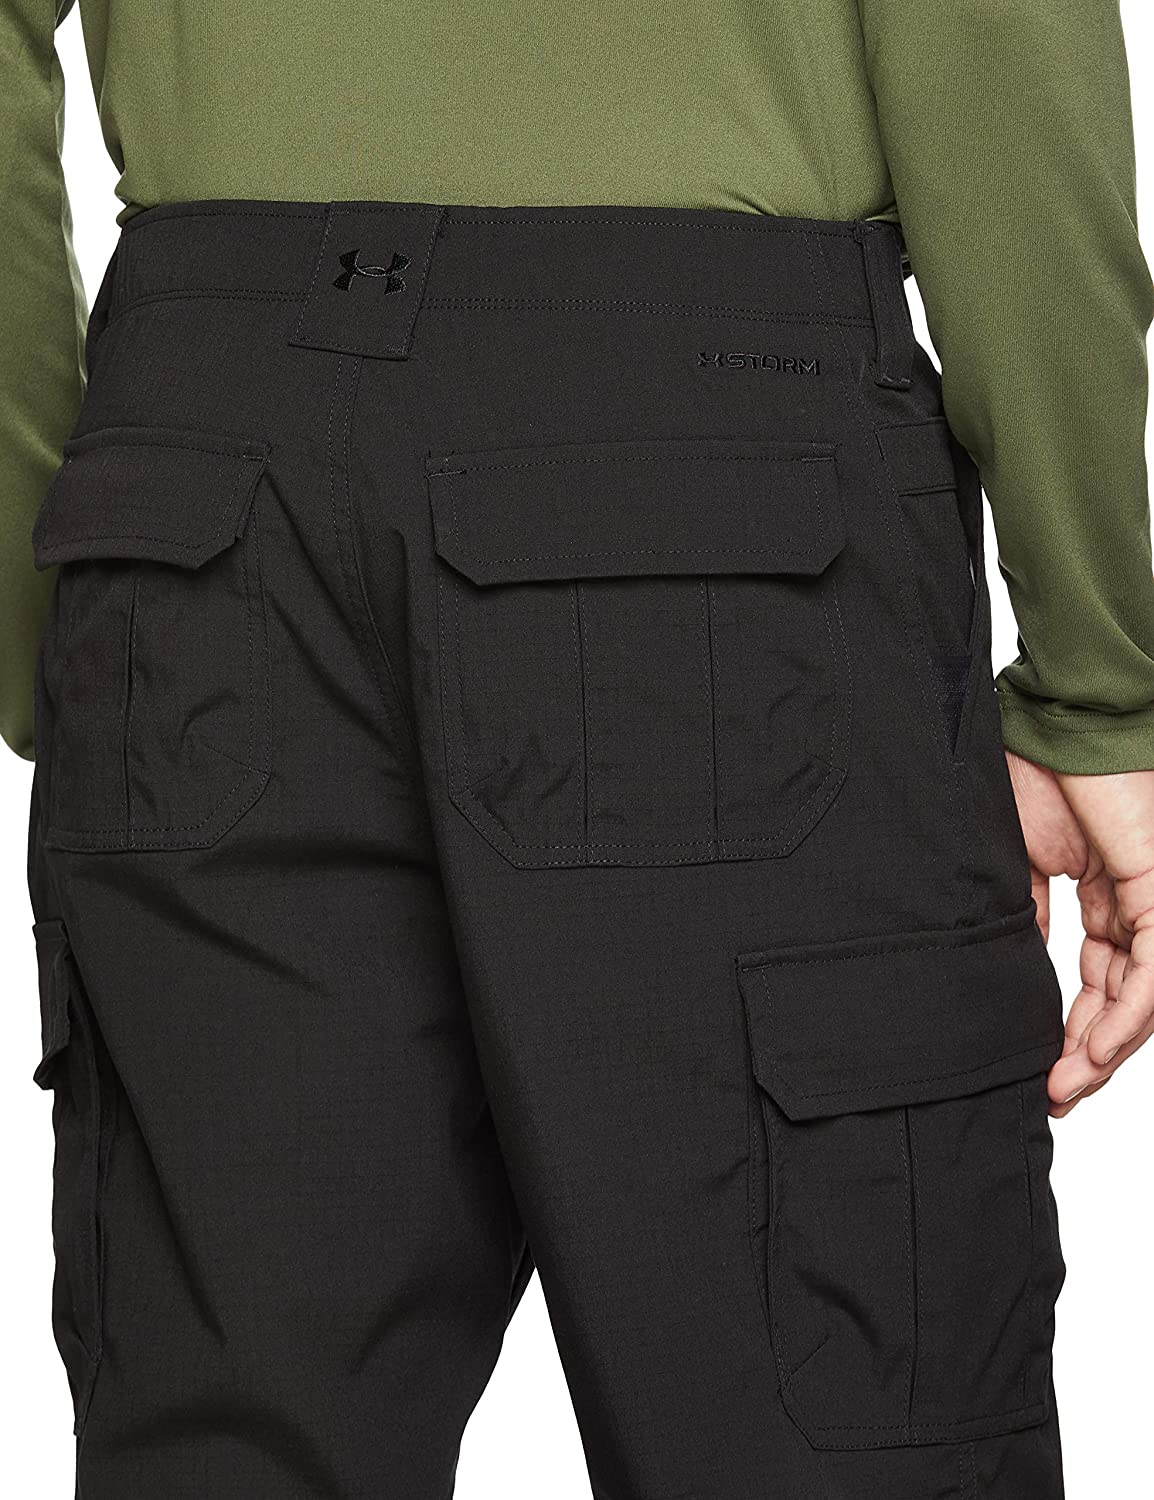 UNDER ARMOUR UA Tactical Patrol Pants - Ultimate Black - Size 30 x 30 - image 3 of 7